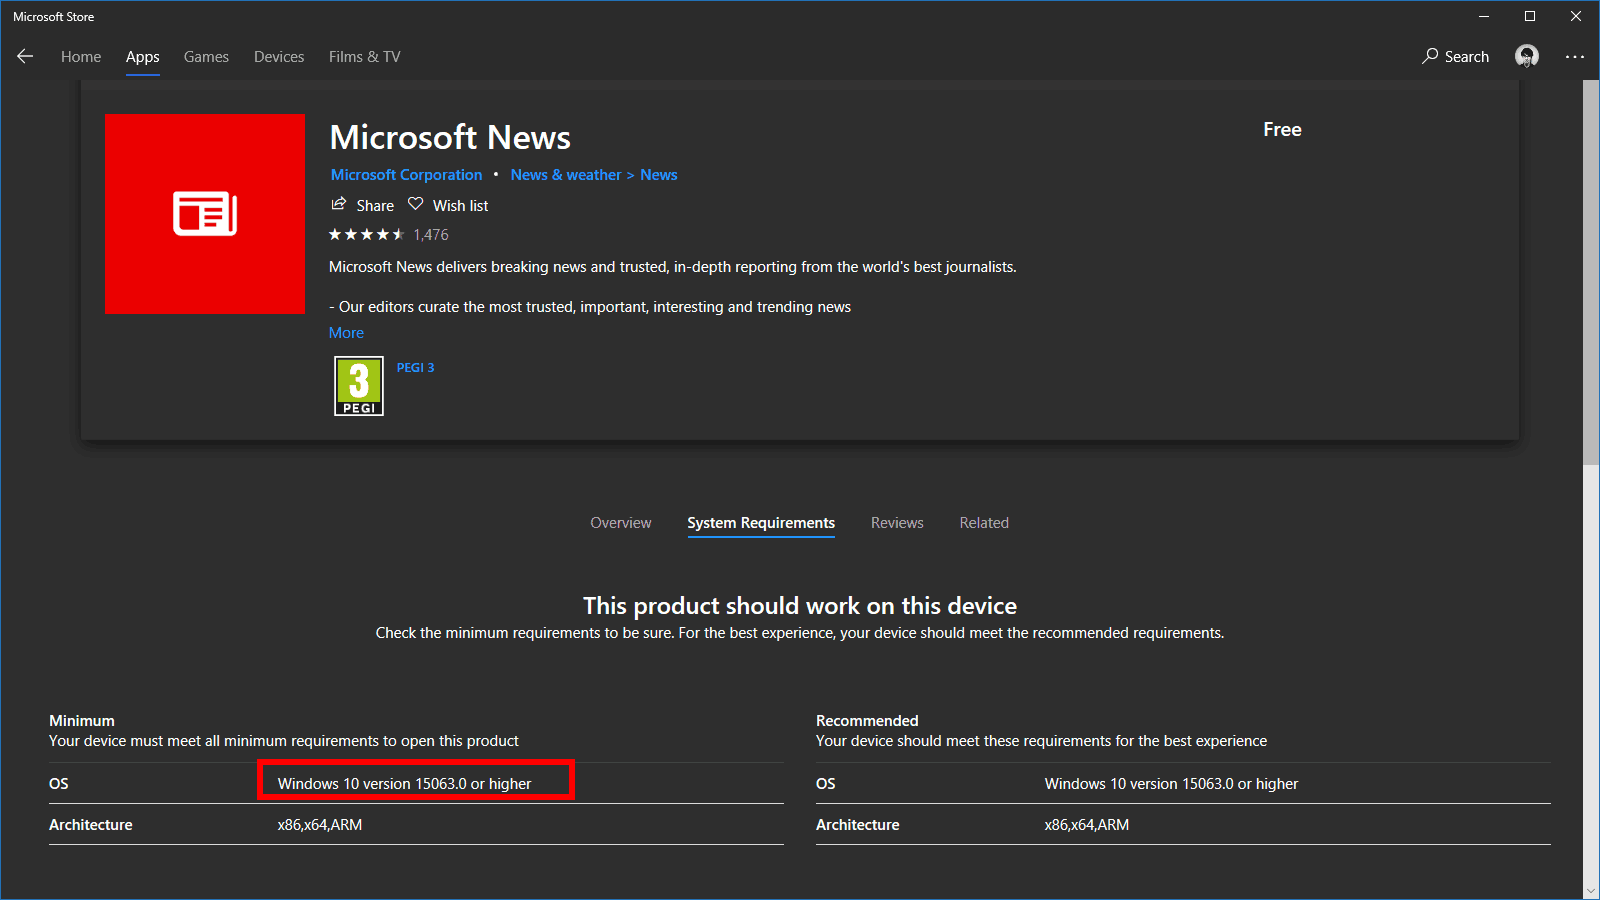 Microsoft News now requires 15063